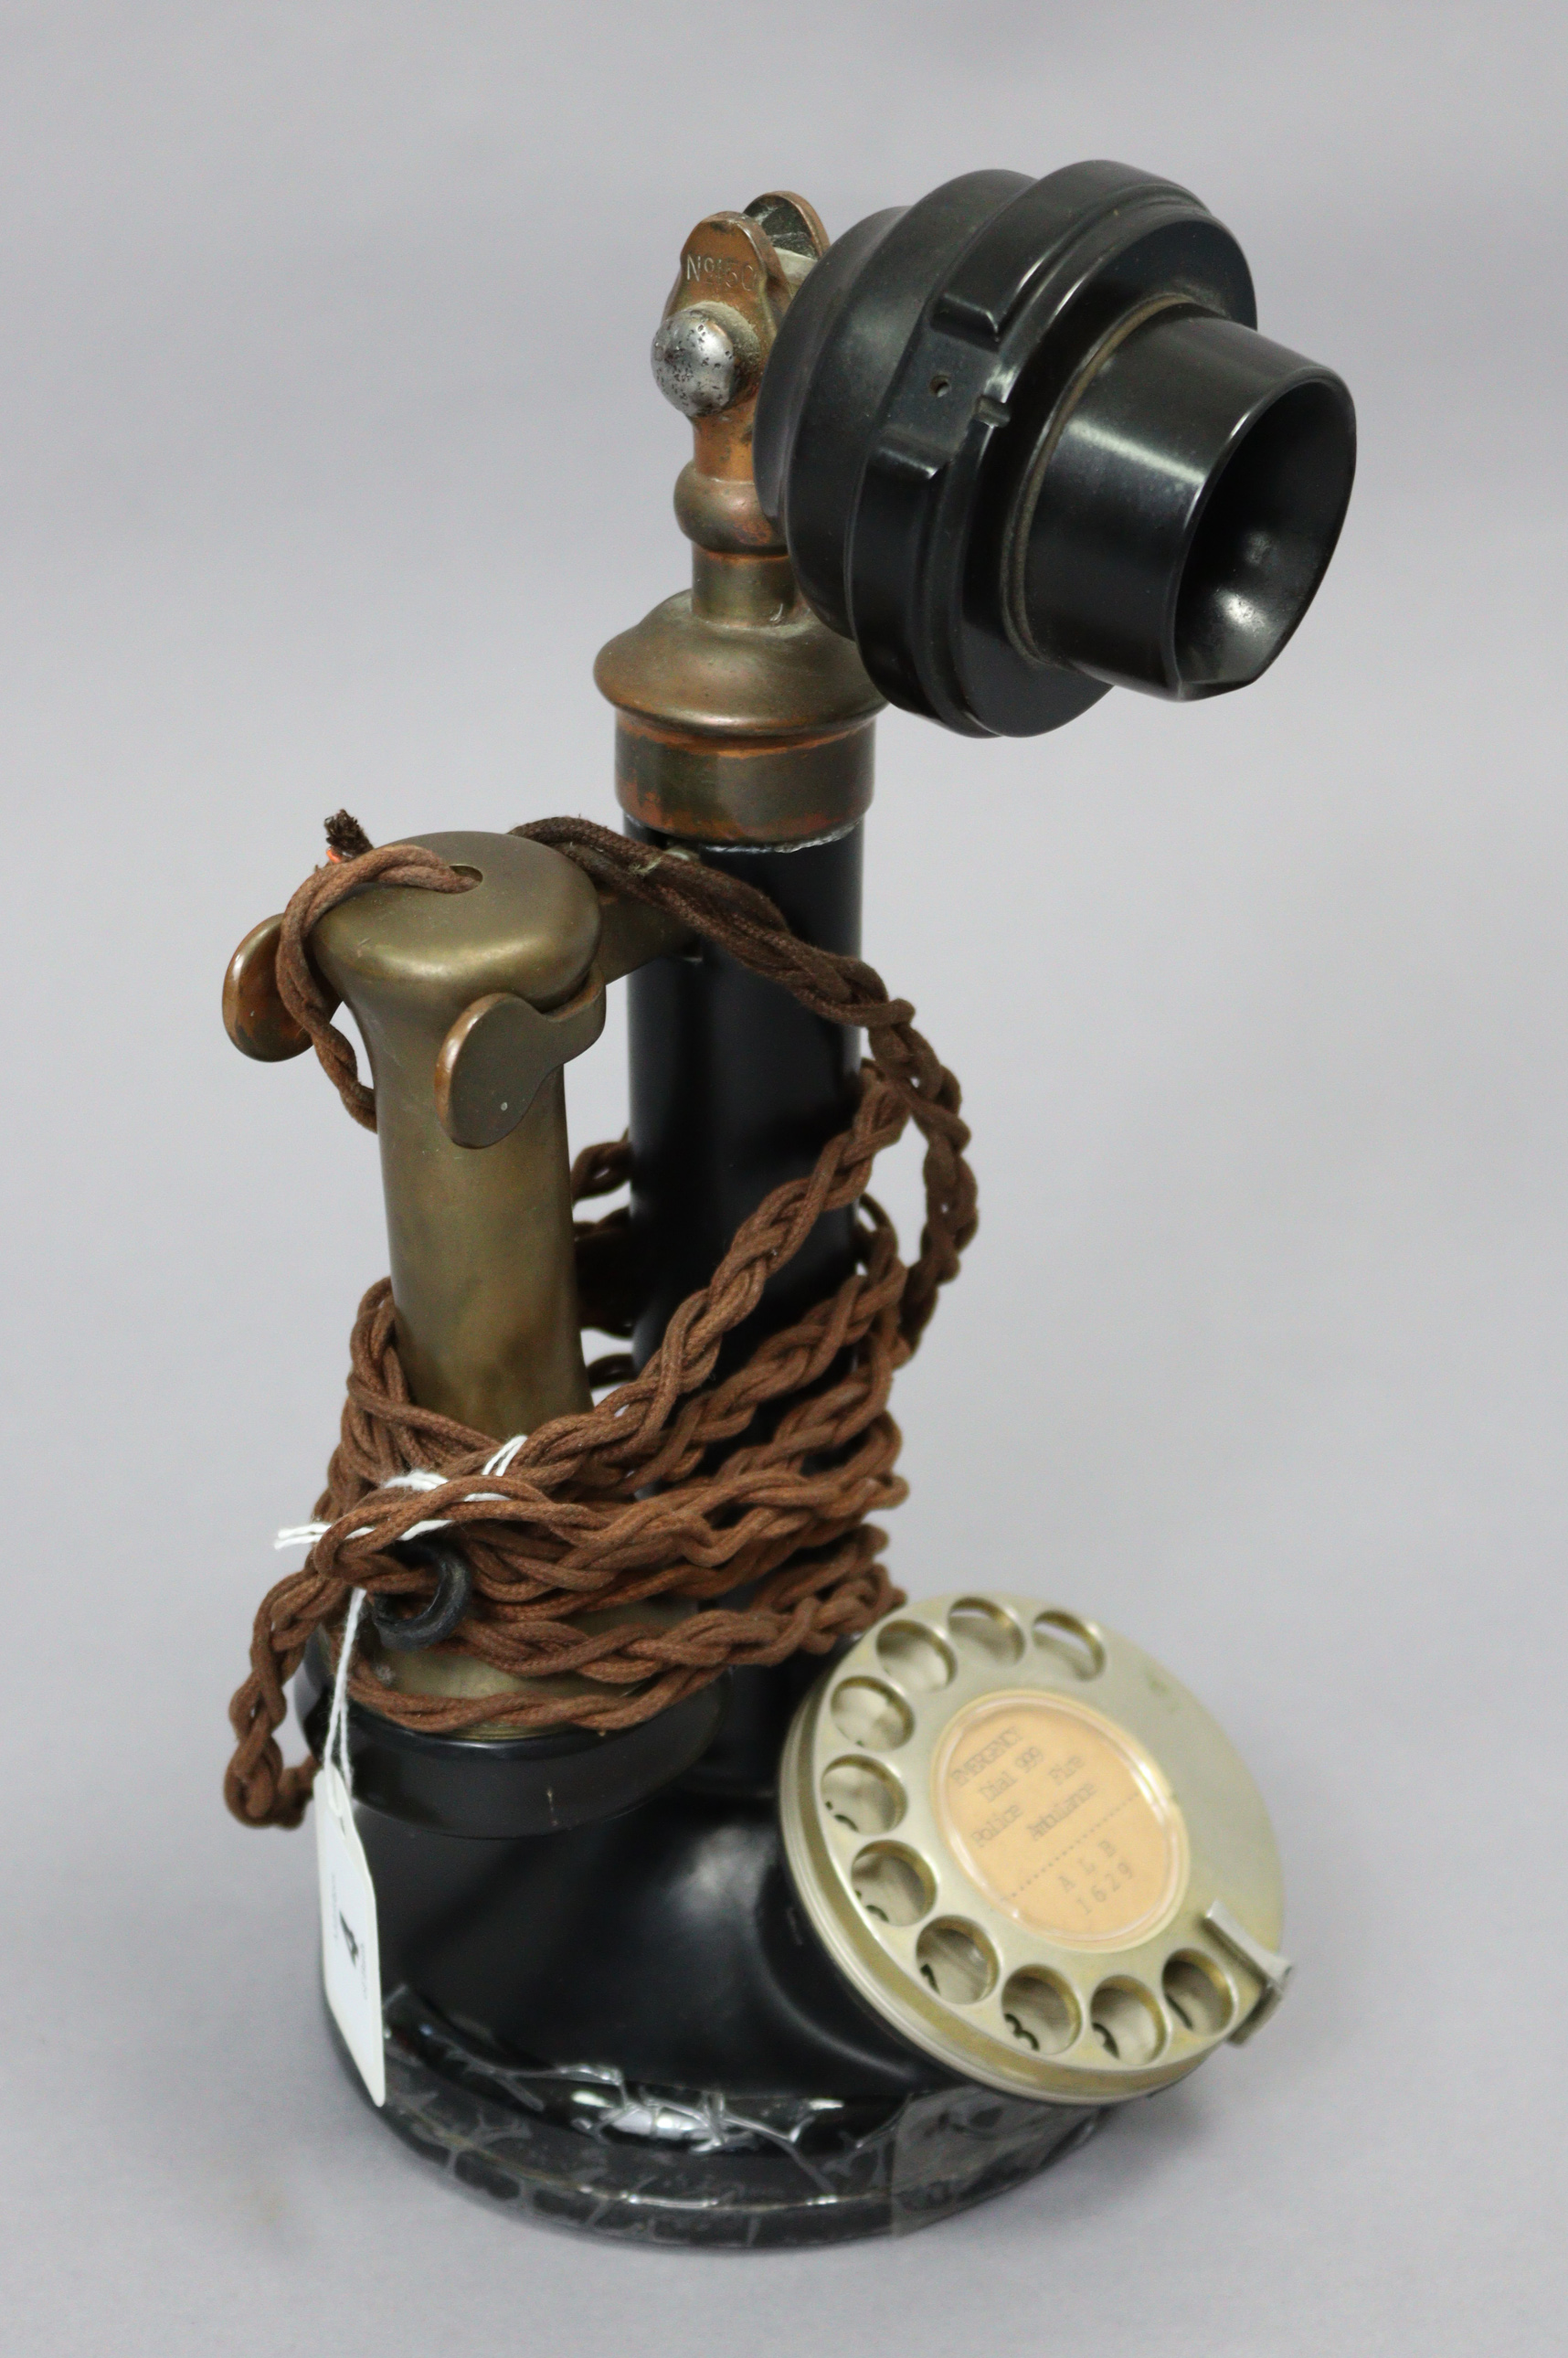 A mid-20th century candlestick telephone (Model No. 150), in black Bakelite case with brass & chrome